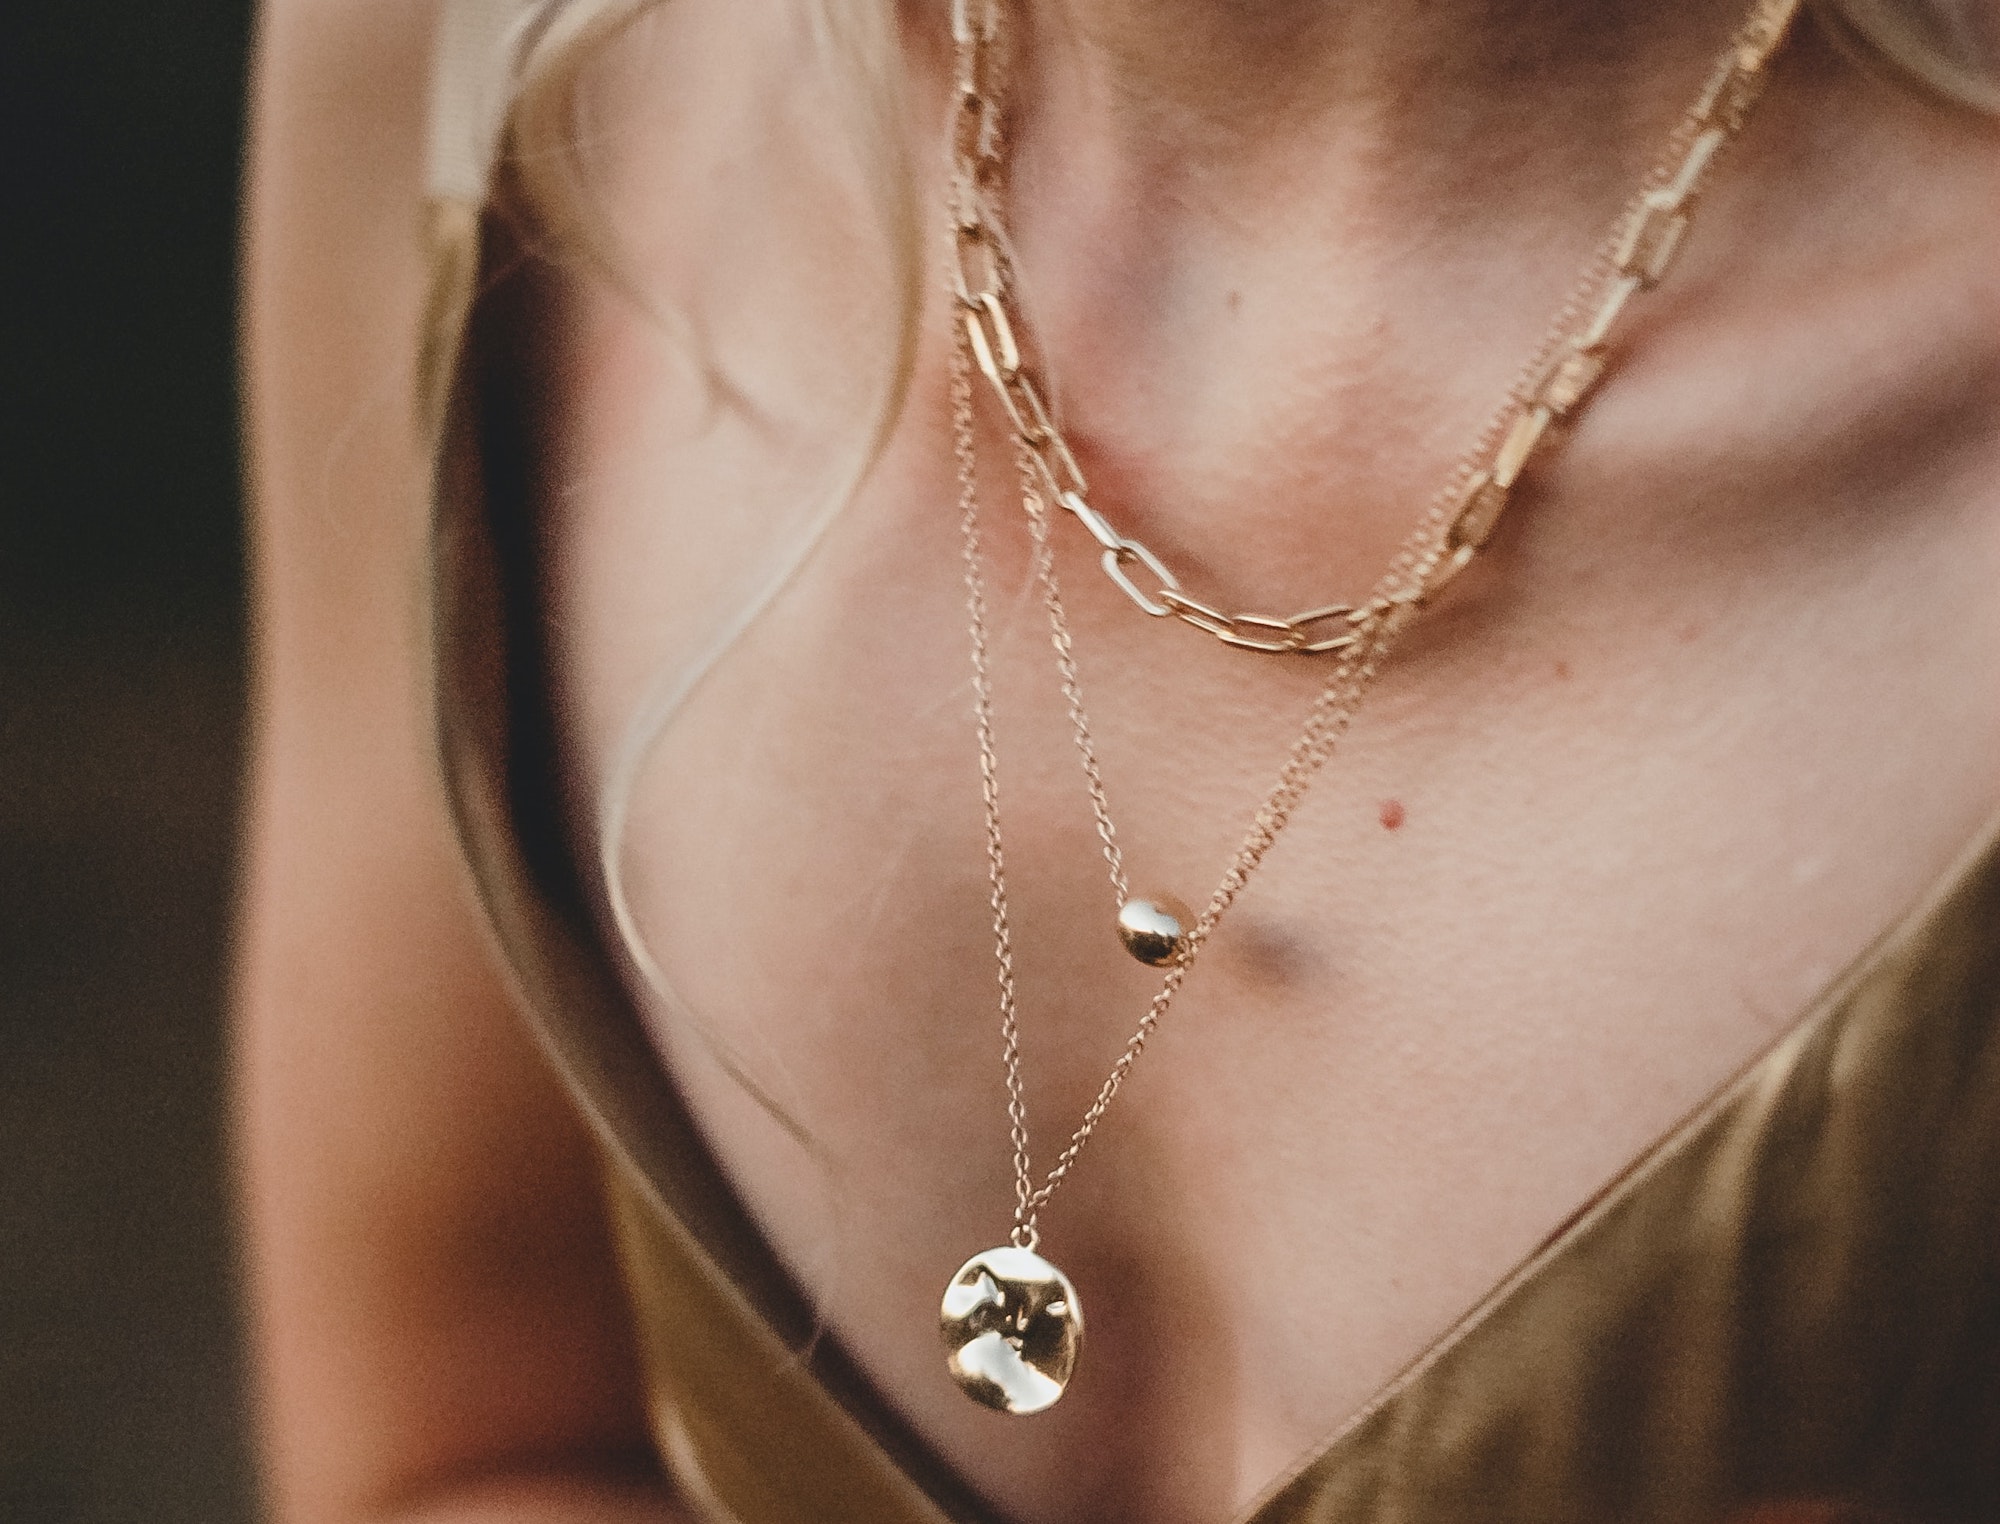 8 Sustainable and Ethical Jewelry Brands